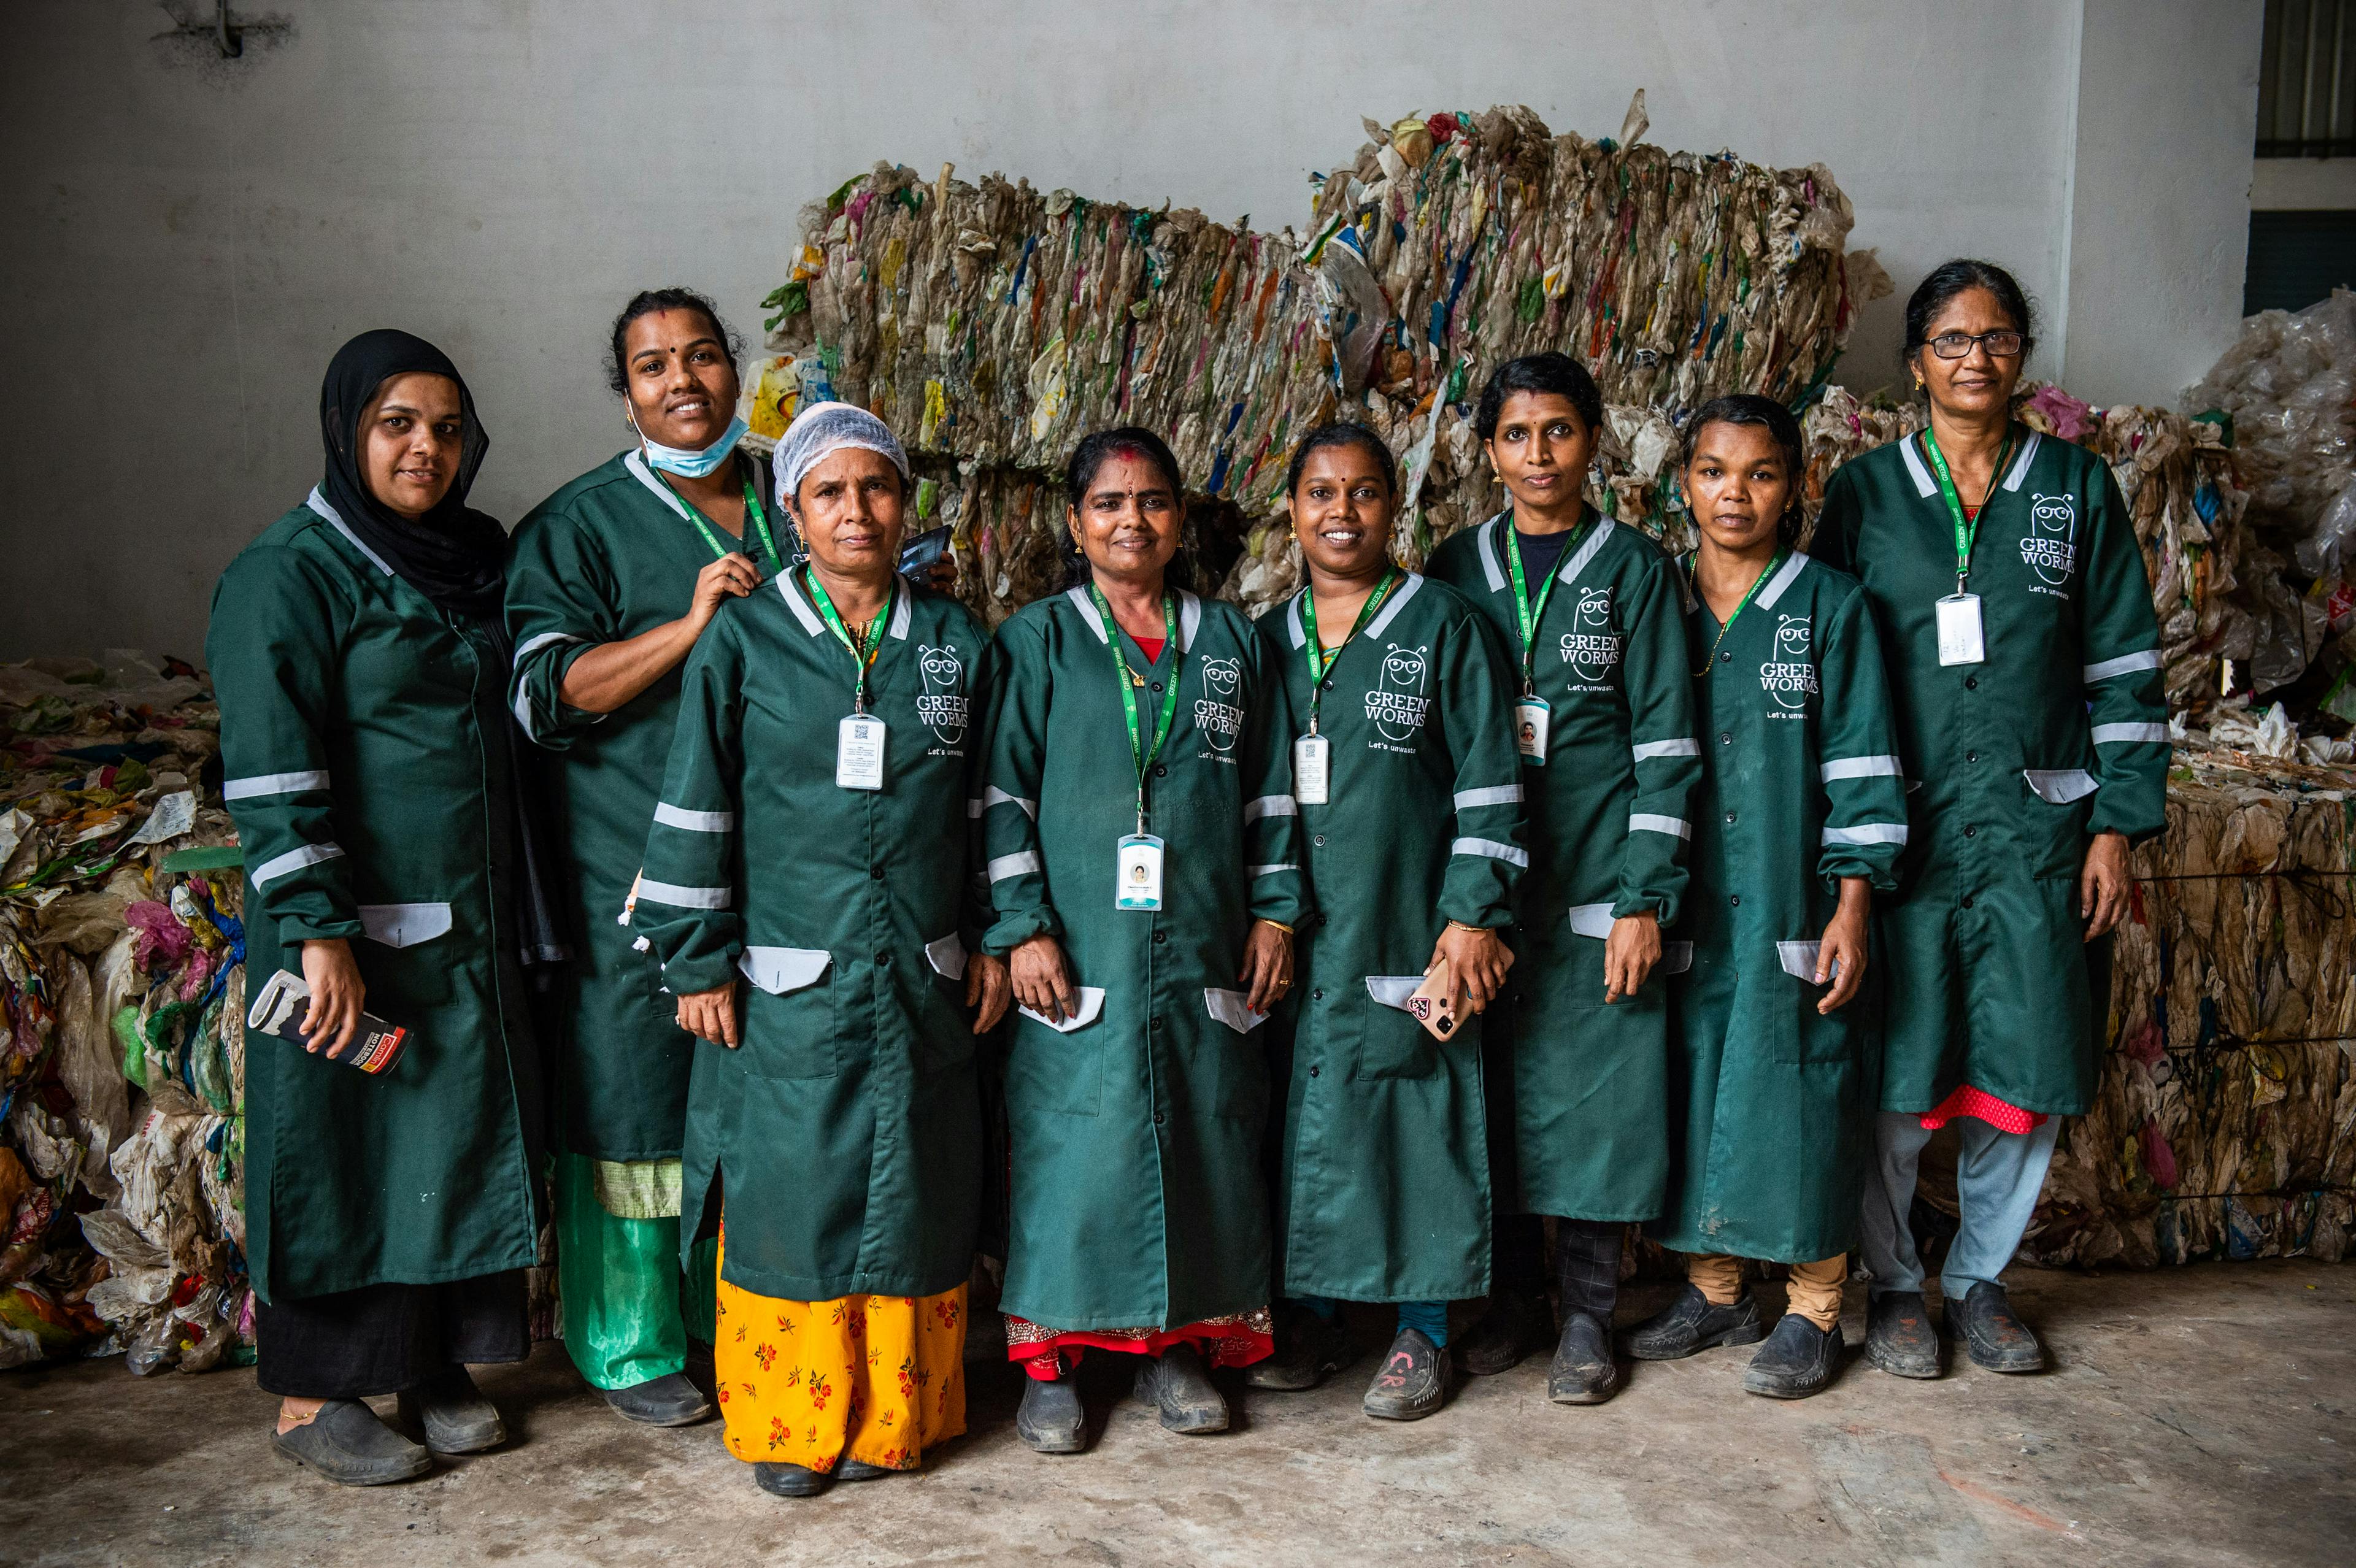 A lineup of women wearing the green rePurpose uniform, standing shoulder to shoulder. Behind them, a pile of sorted waste ready to be repurposed.